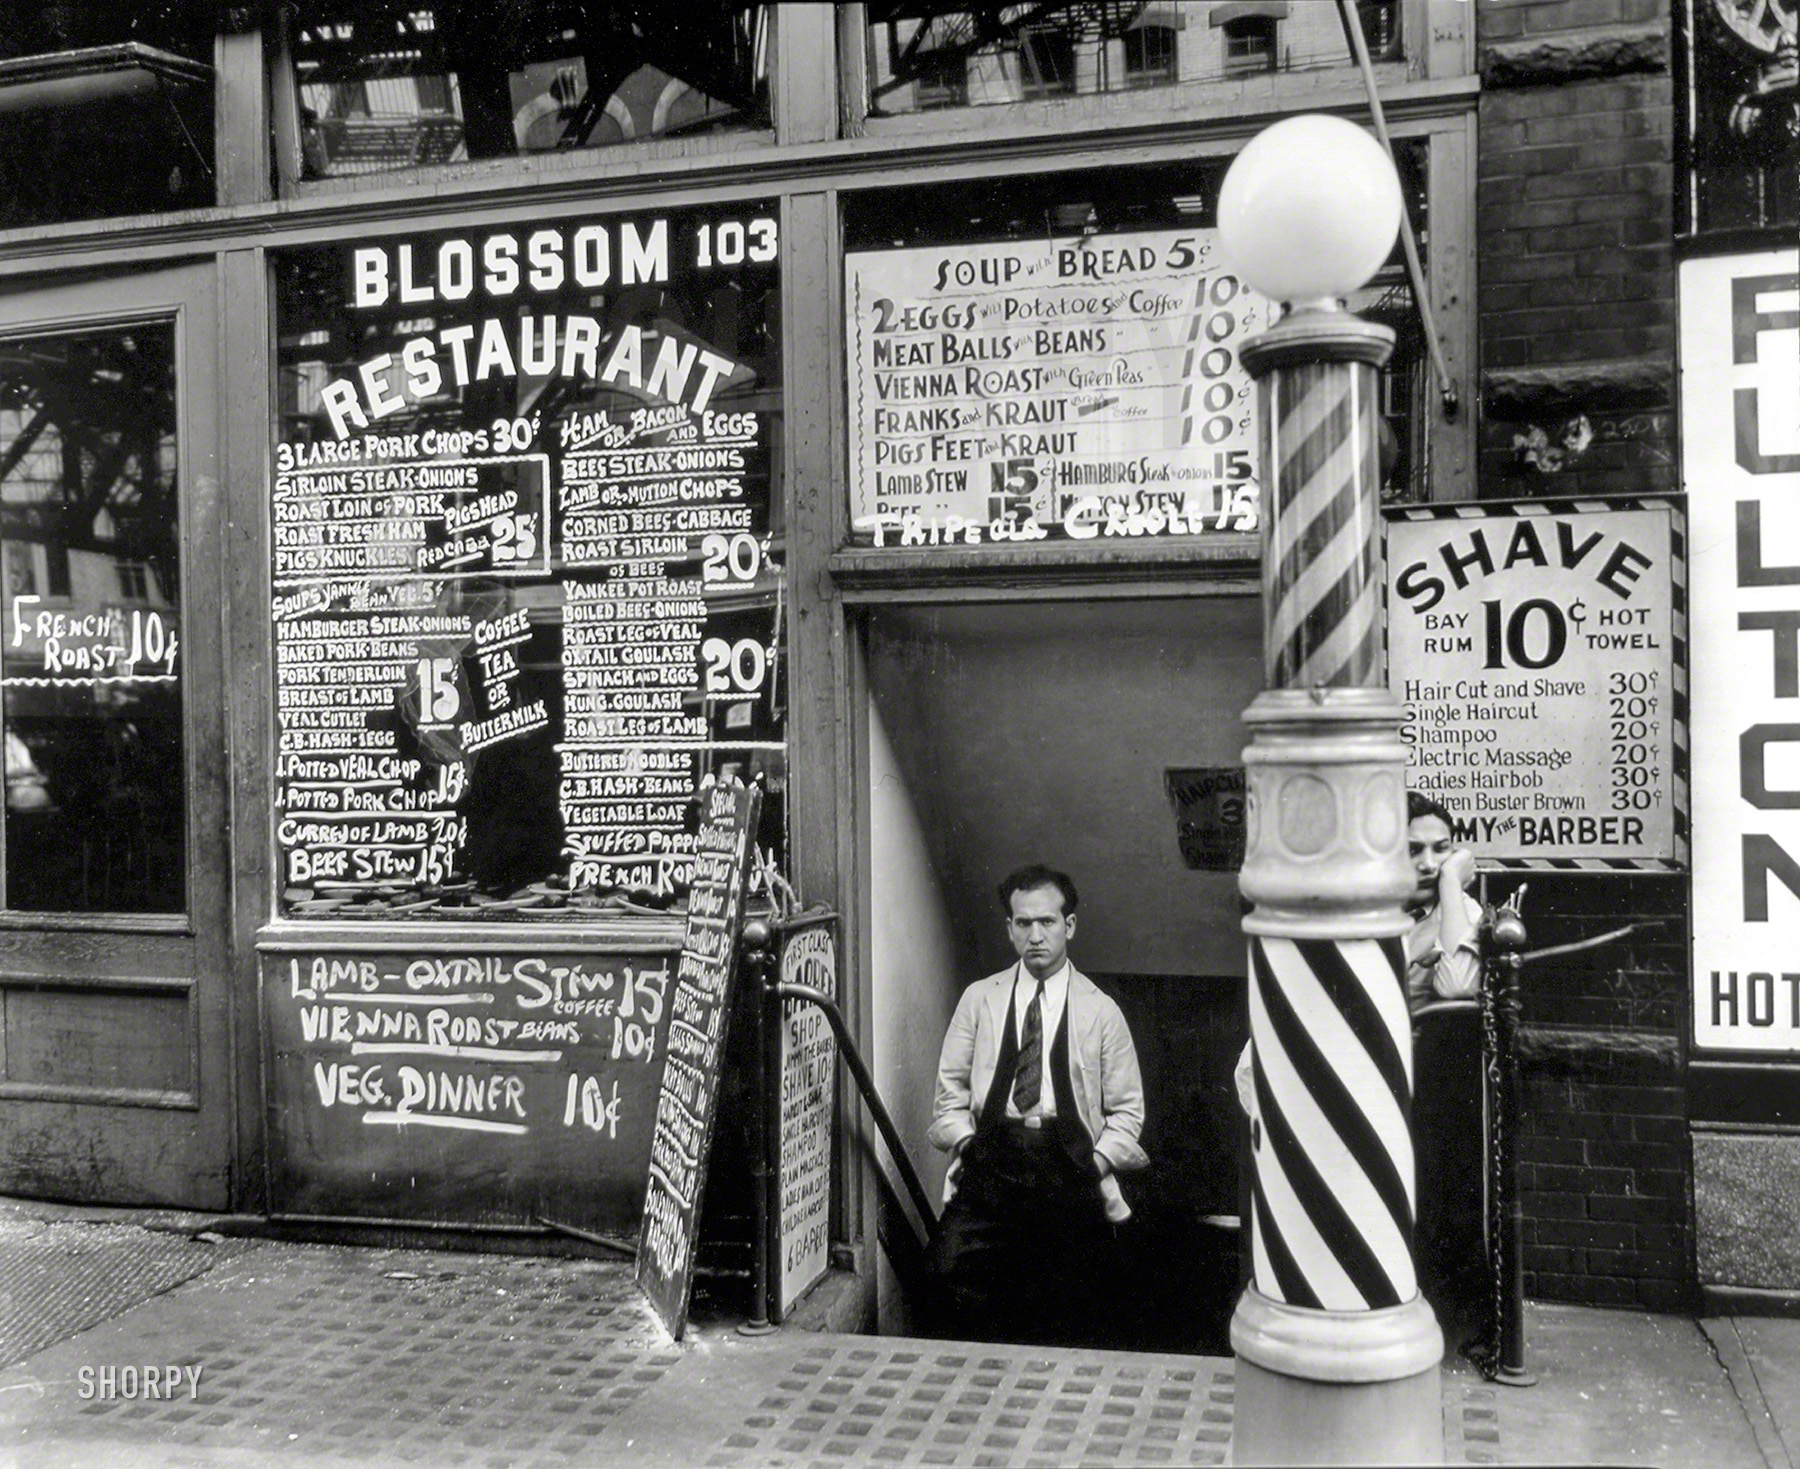 Oct. 3, 1935. "Blossom Restaurant, 103 Bowery, Manhattan." 8x10 gelatin silver print by Berenice Abbott for the Federal Art Project. View full size.